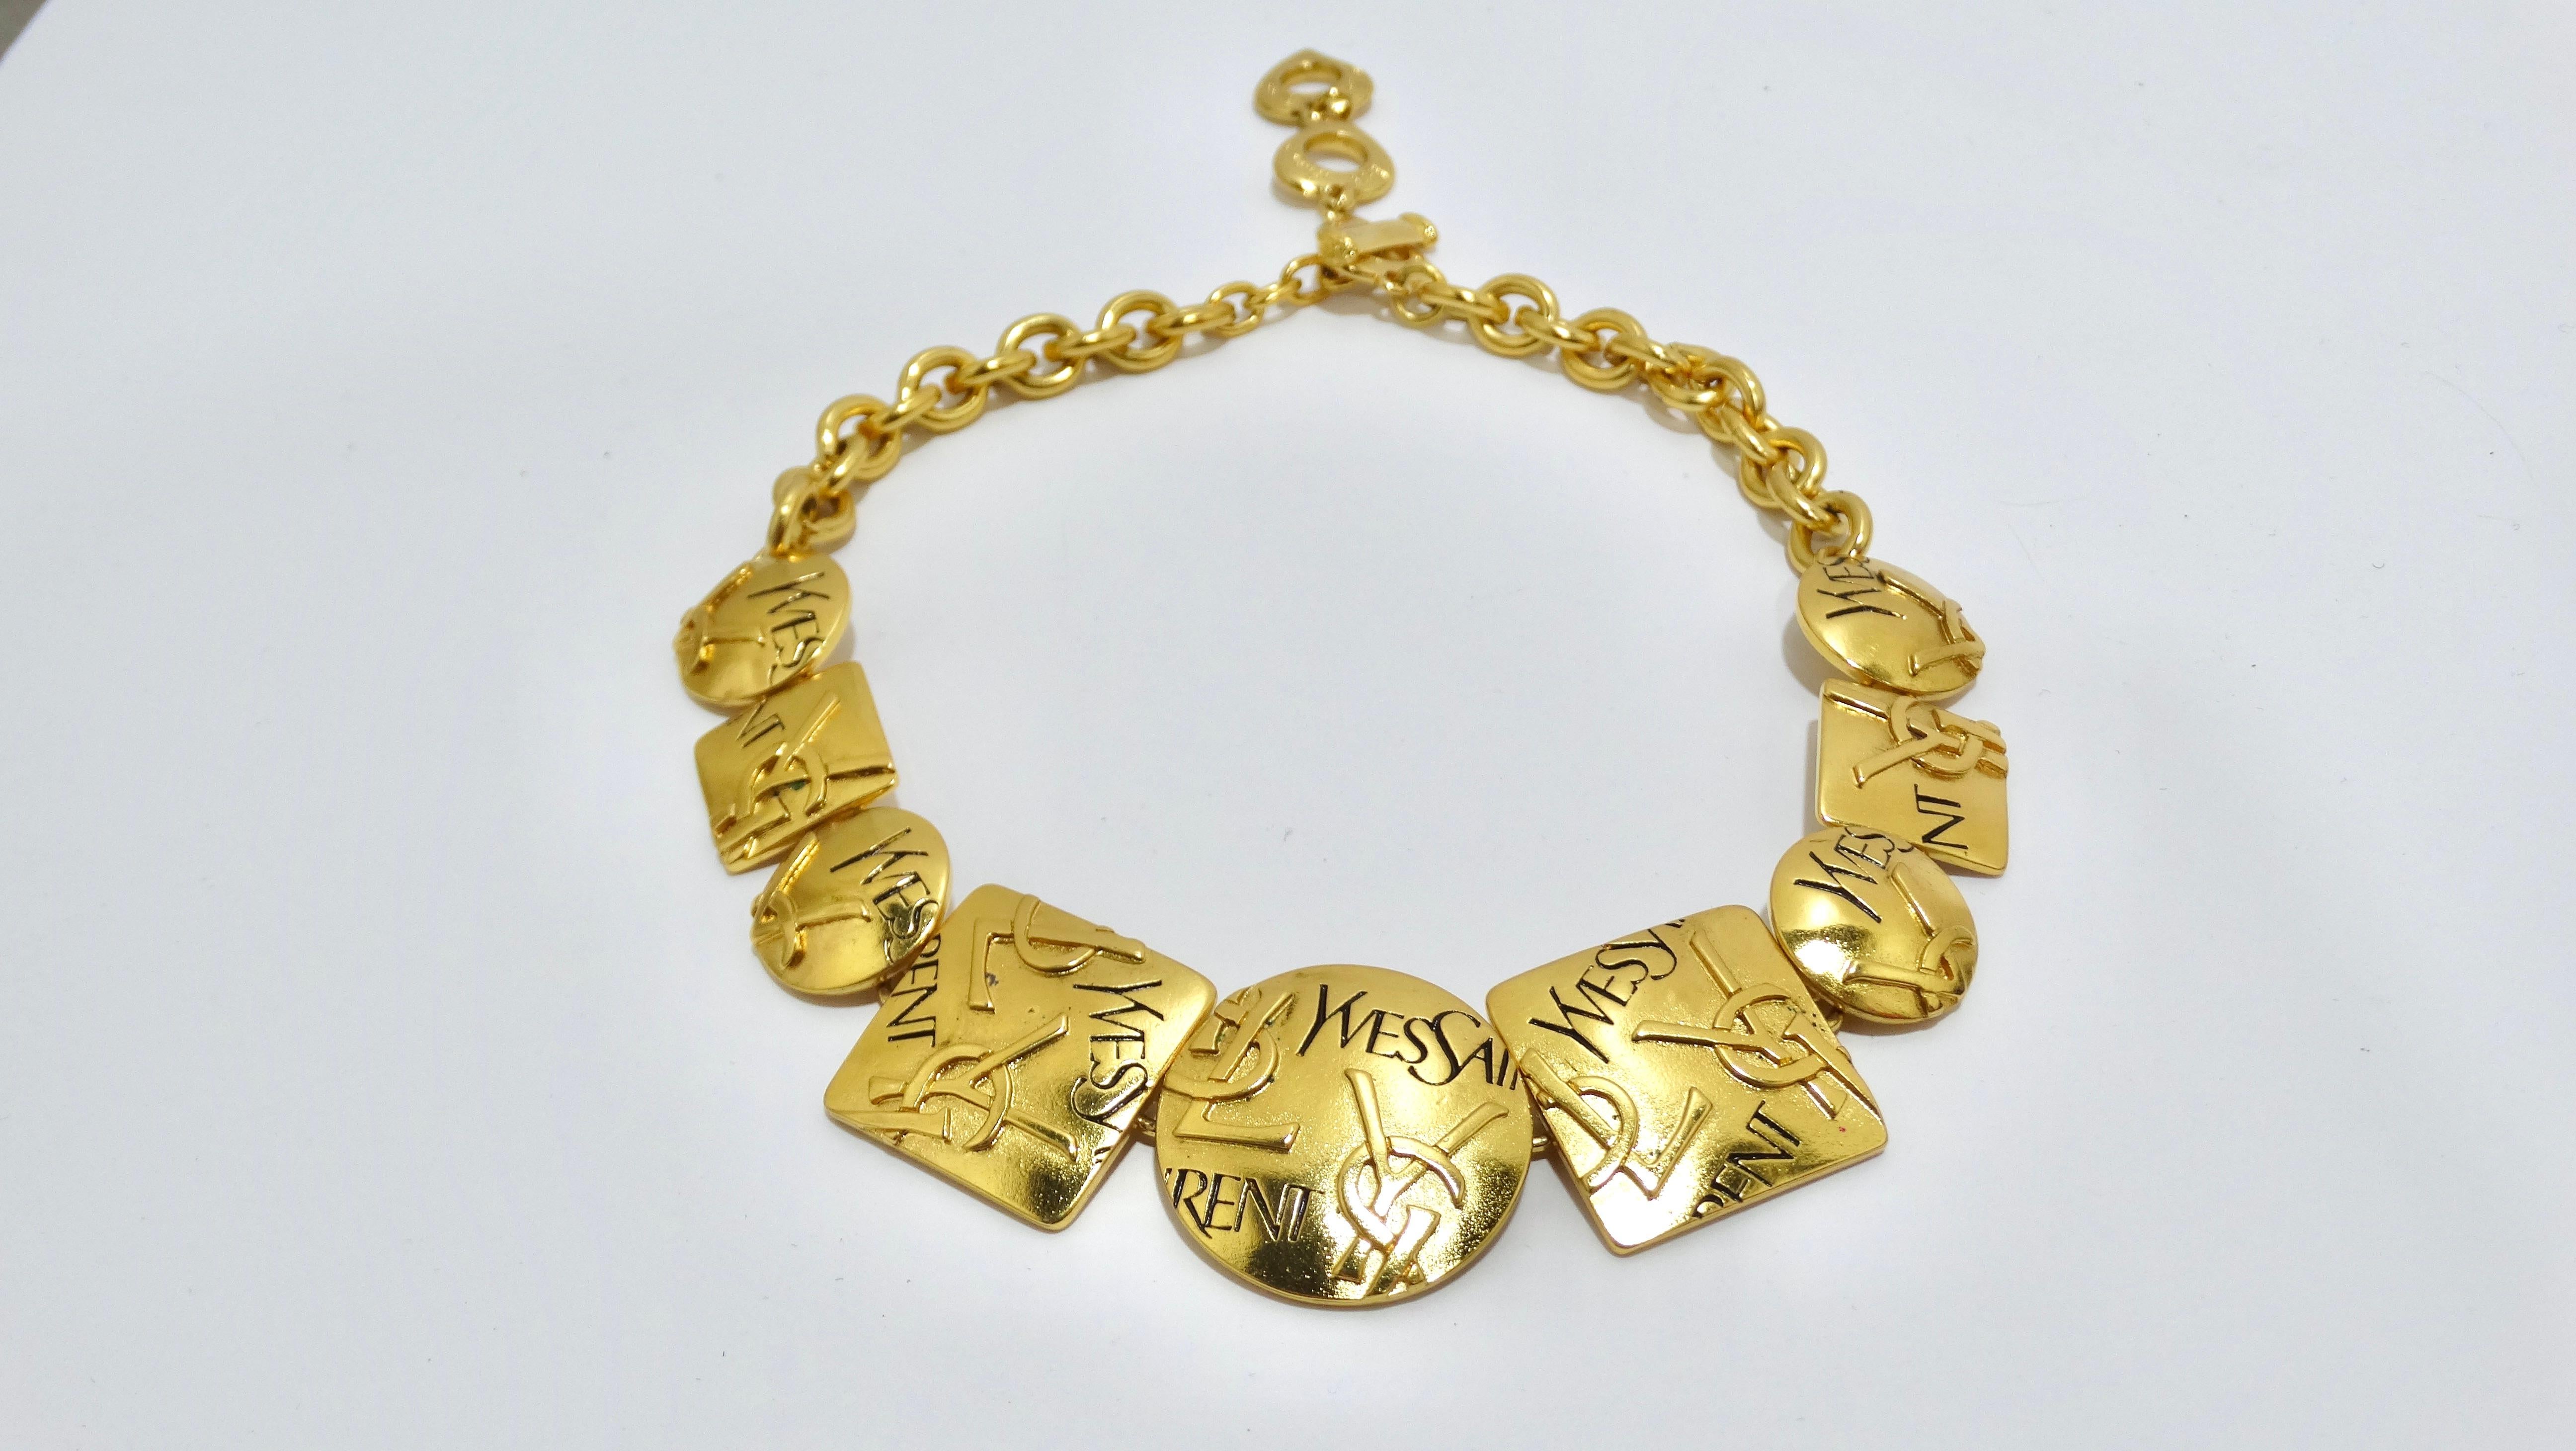 Don't miss out on this electric 80's piece of art! This Yves Saint Laurent necklace will bring out your edgy side. It features a full neckline of geometric shapes embossed and engraved with YSL initial logos. Signed 'YSL Made in France' on the